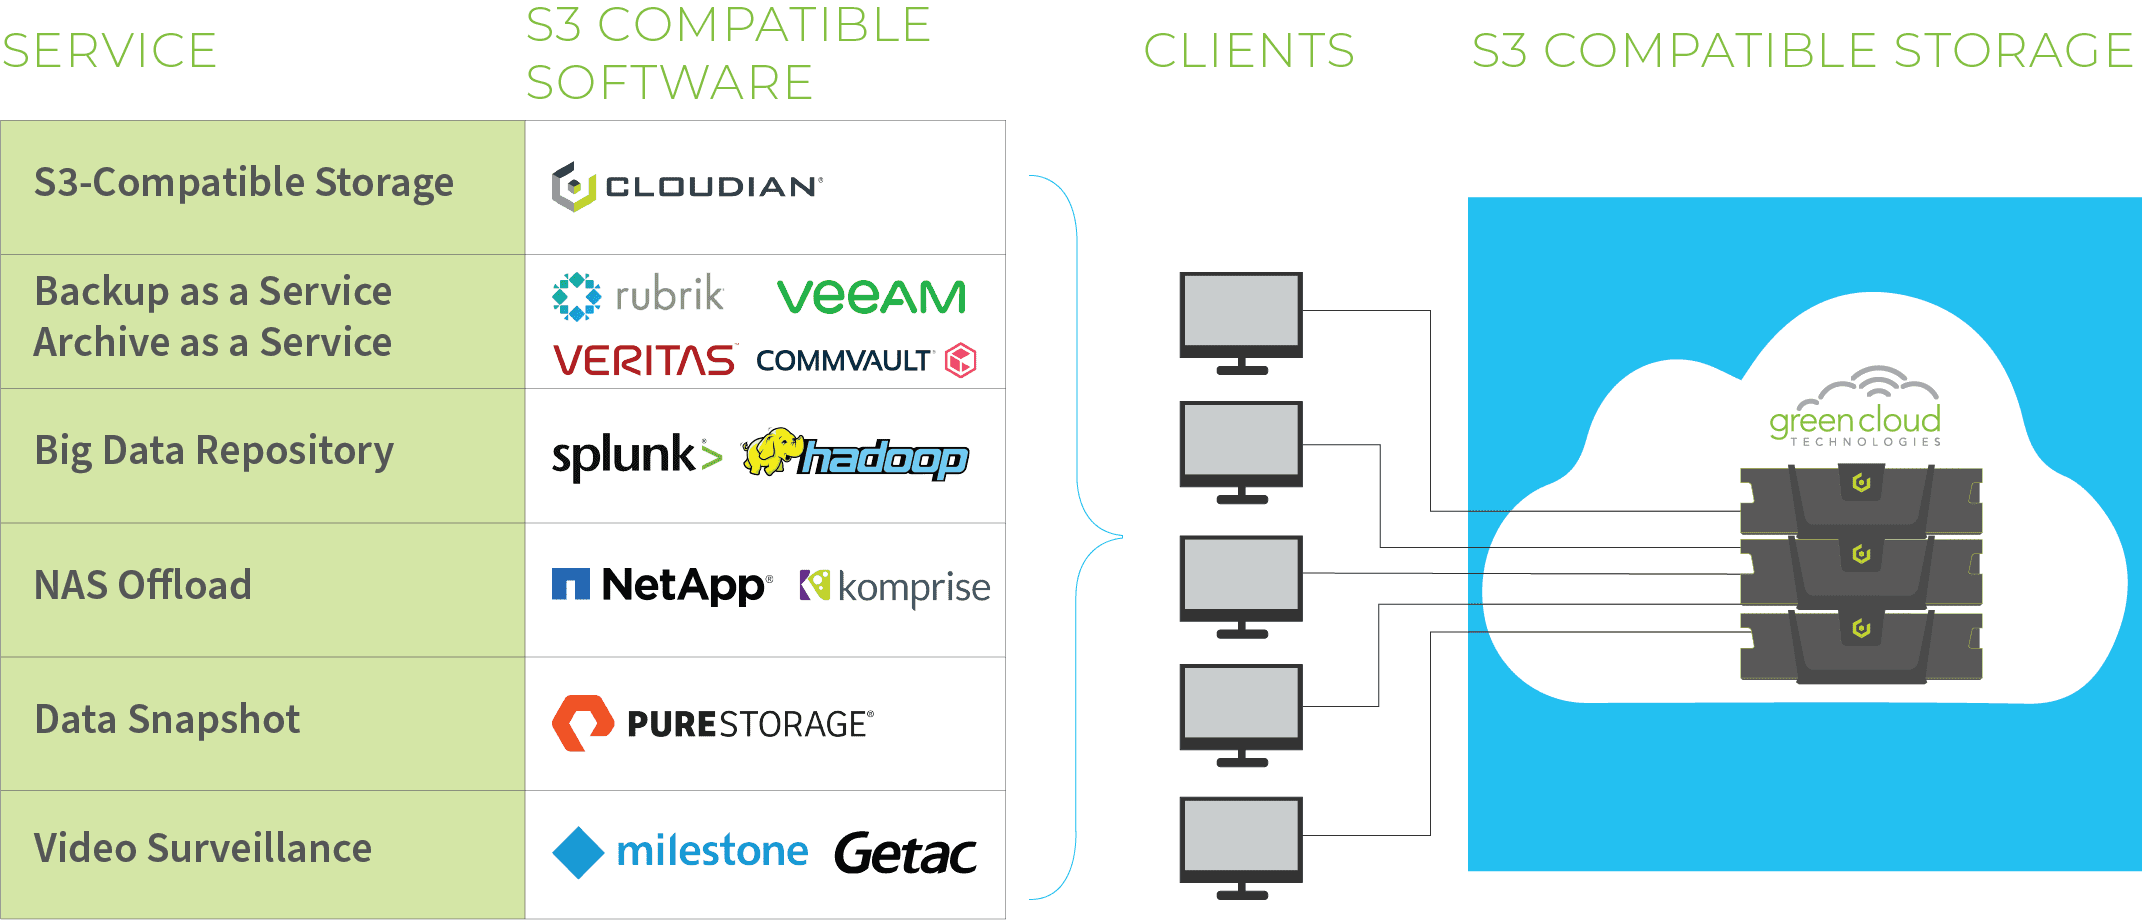 CLOUDIAN-OBJECT-STORAGE-GRAPHIC